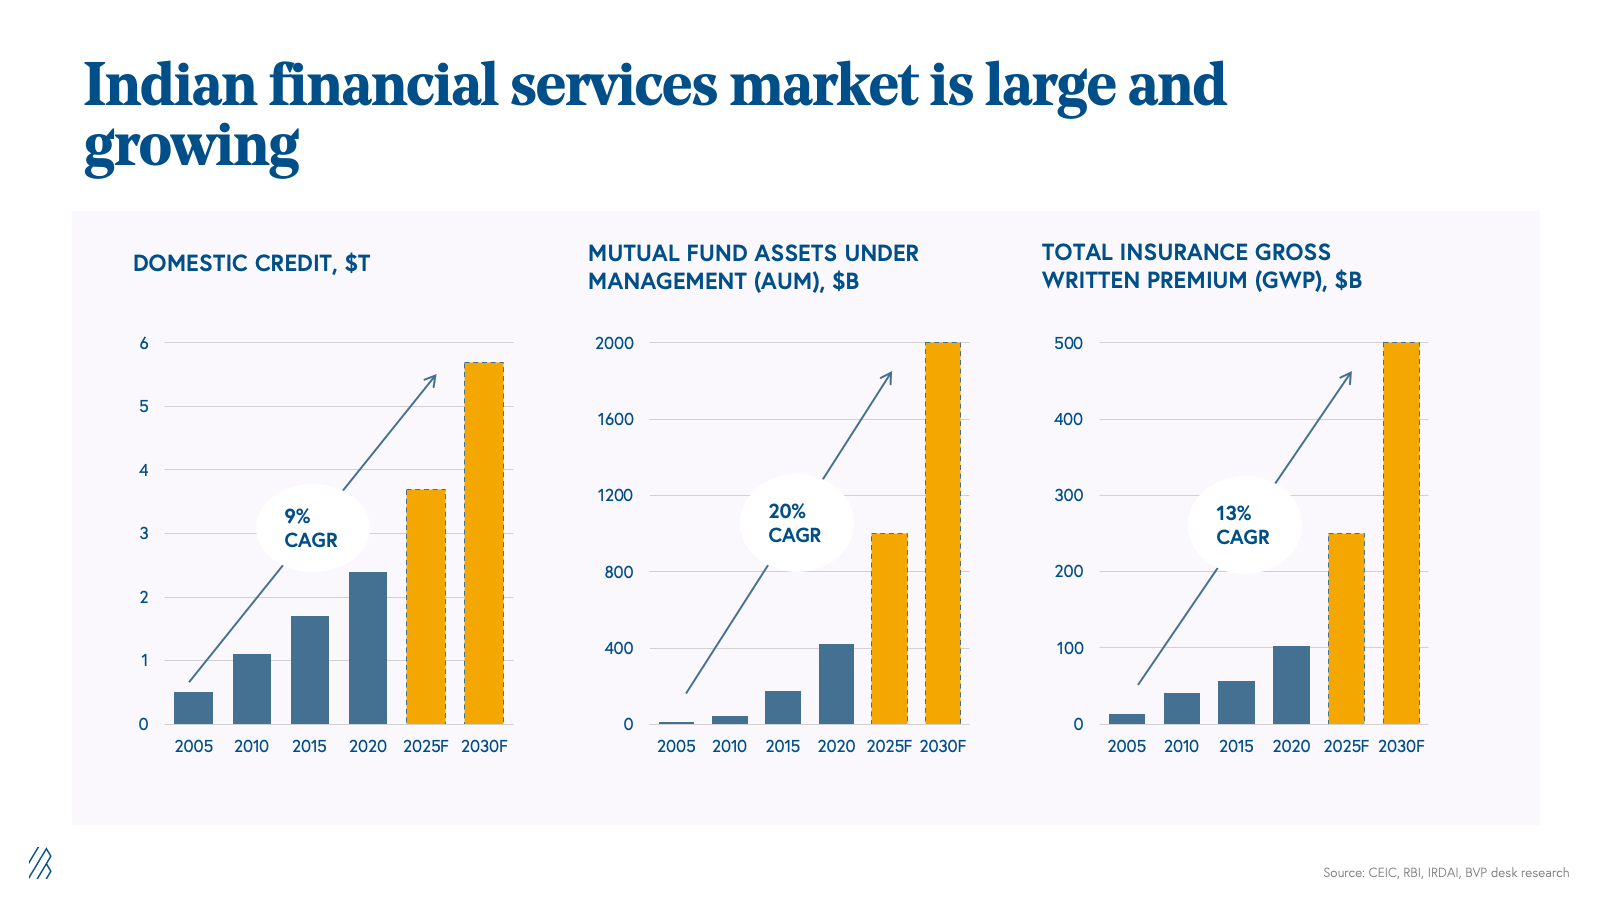 The Indian market for financial services is large and growing